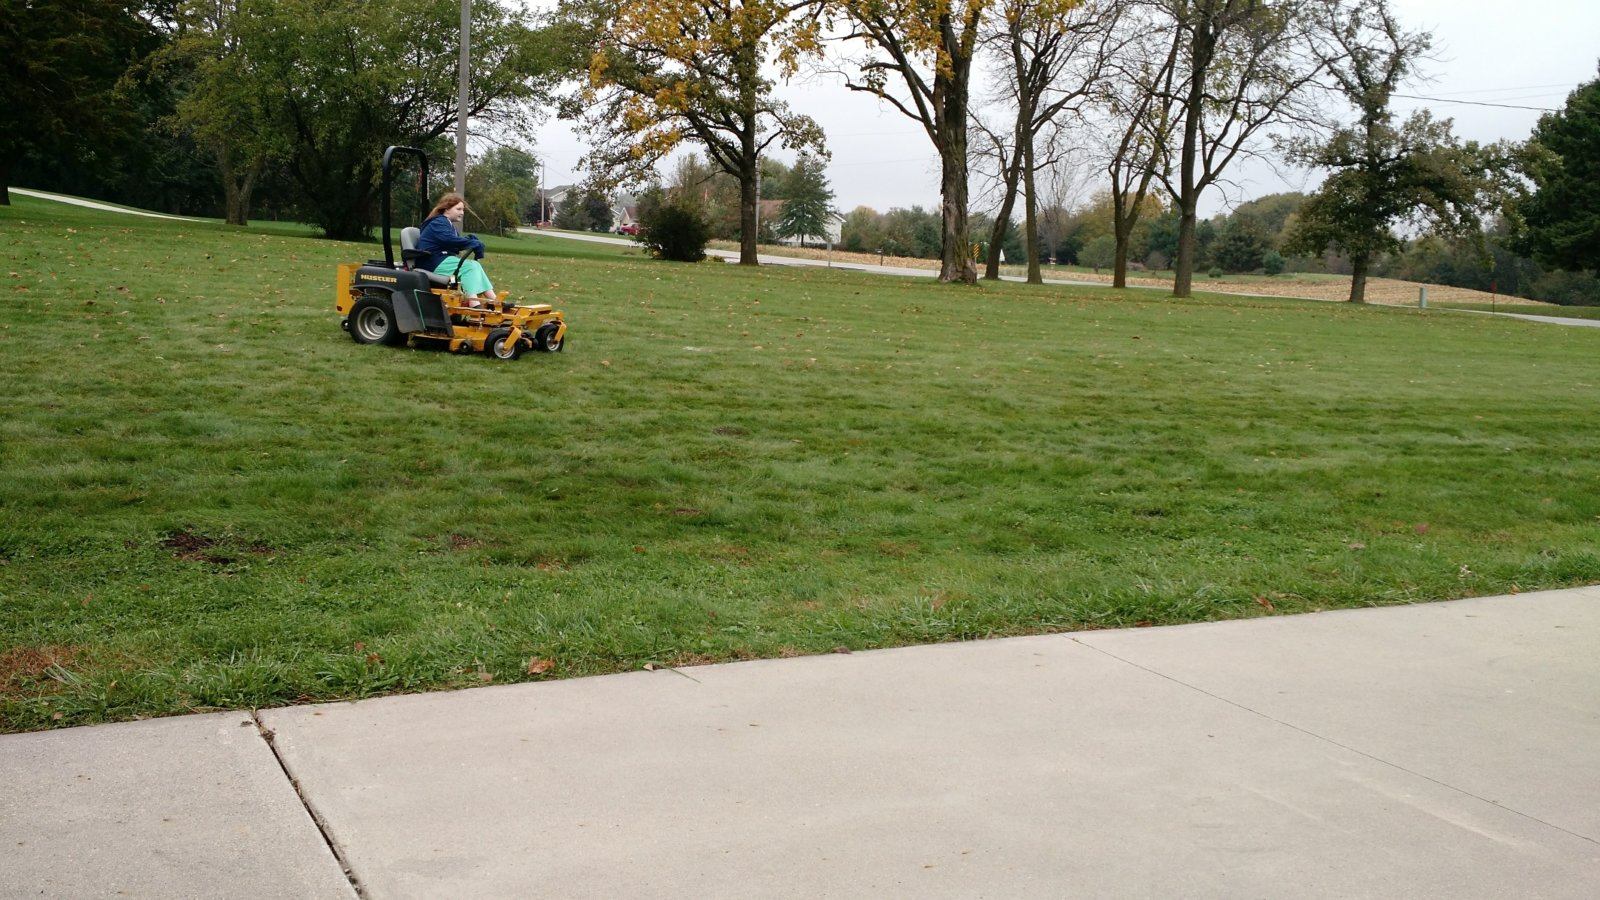 The mower provided hours of fun.